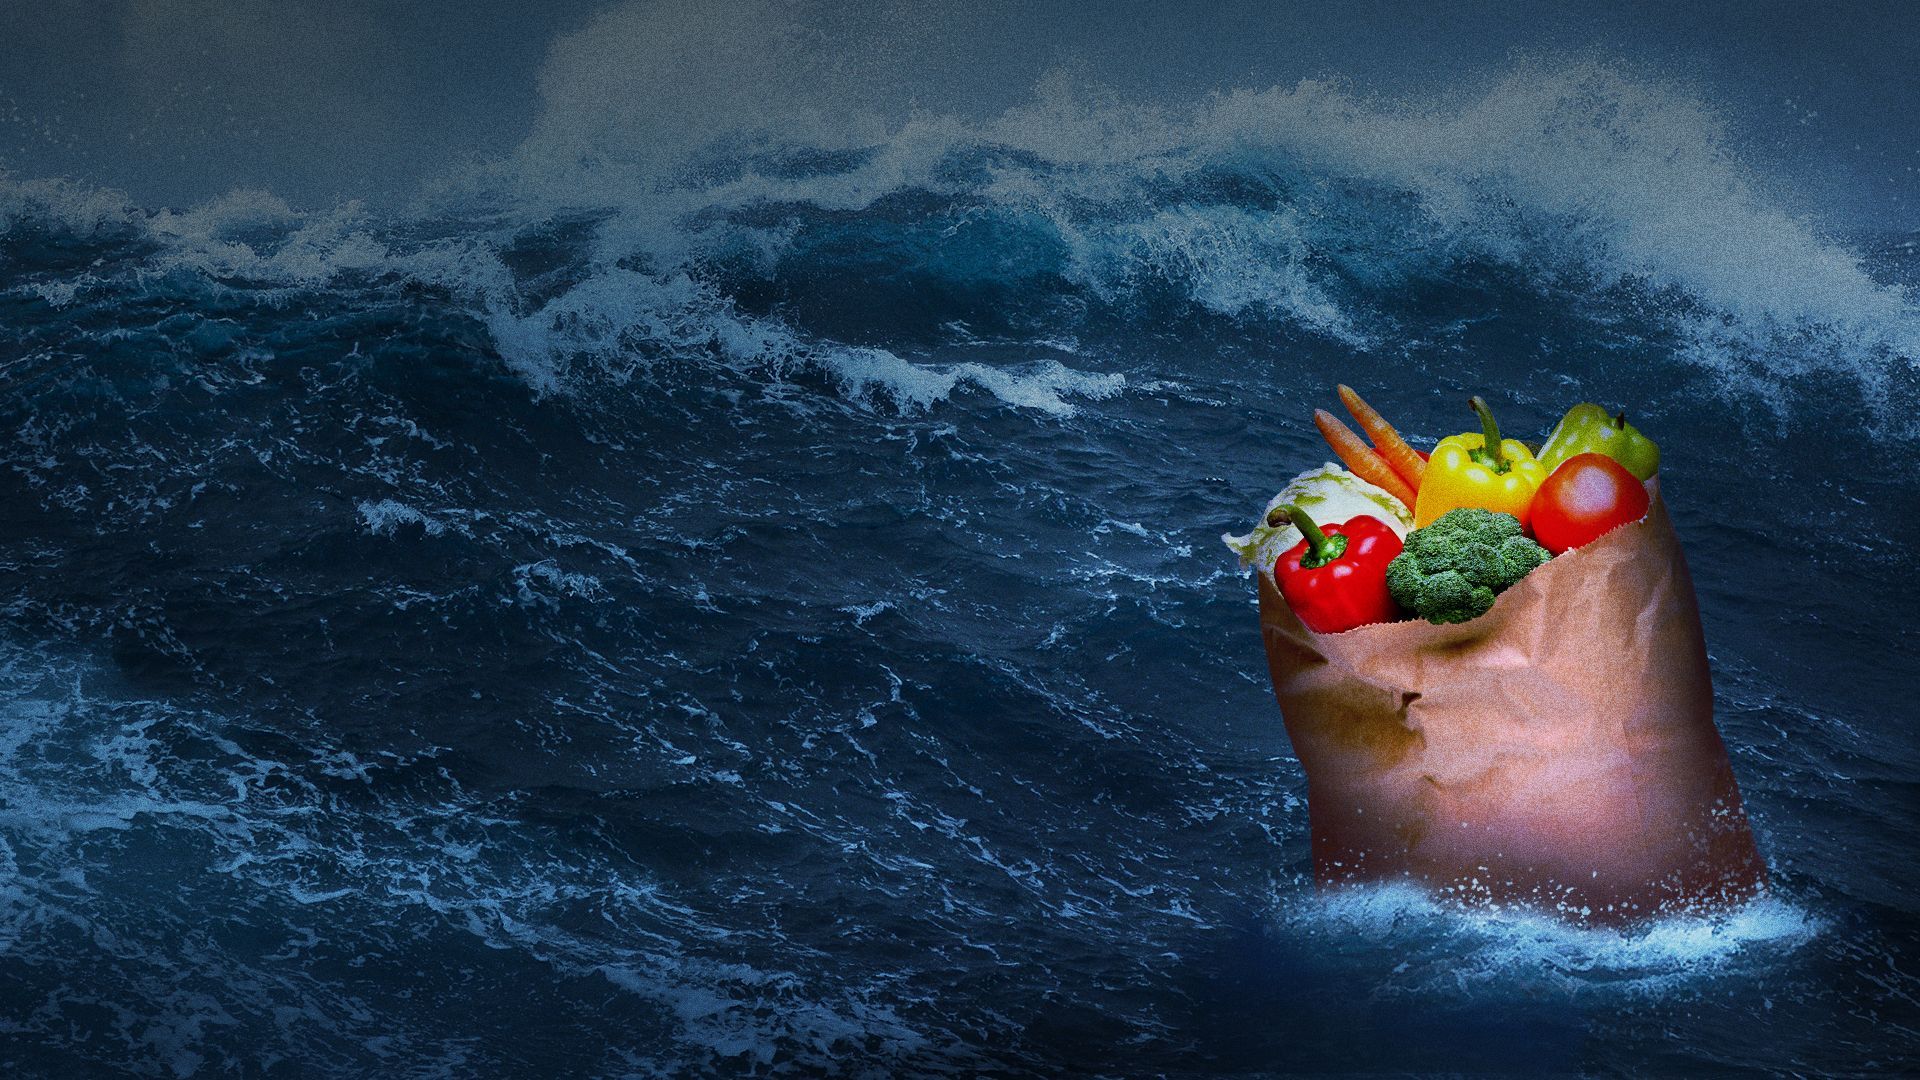 Illustration of a bag of groceries floating in the ocean during a storm.